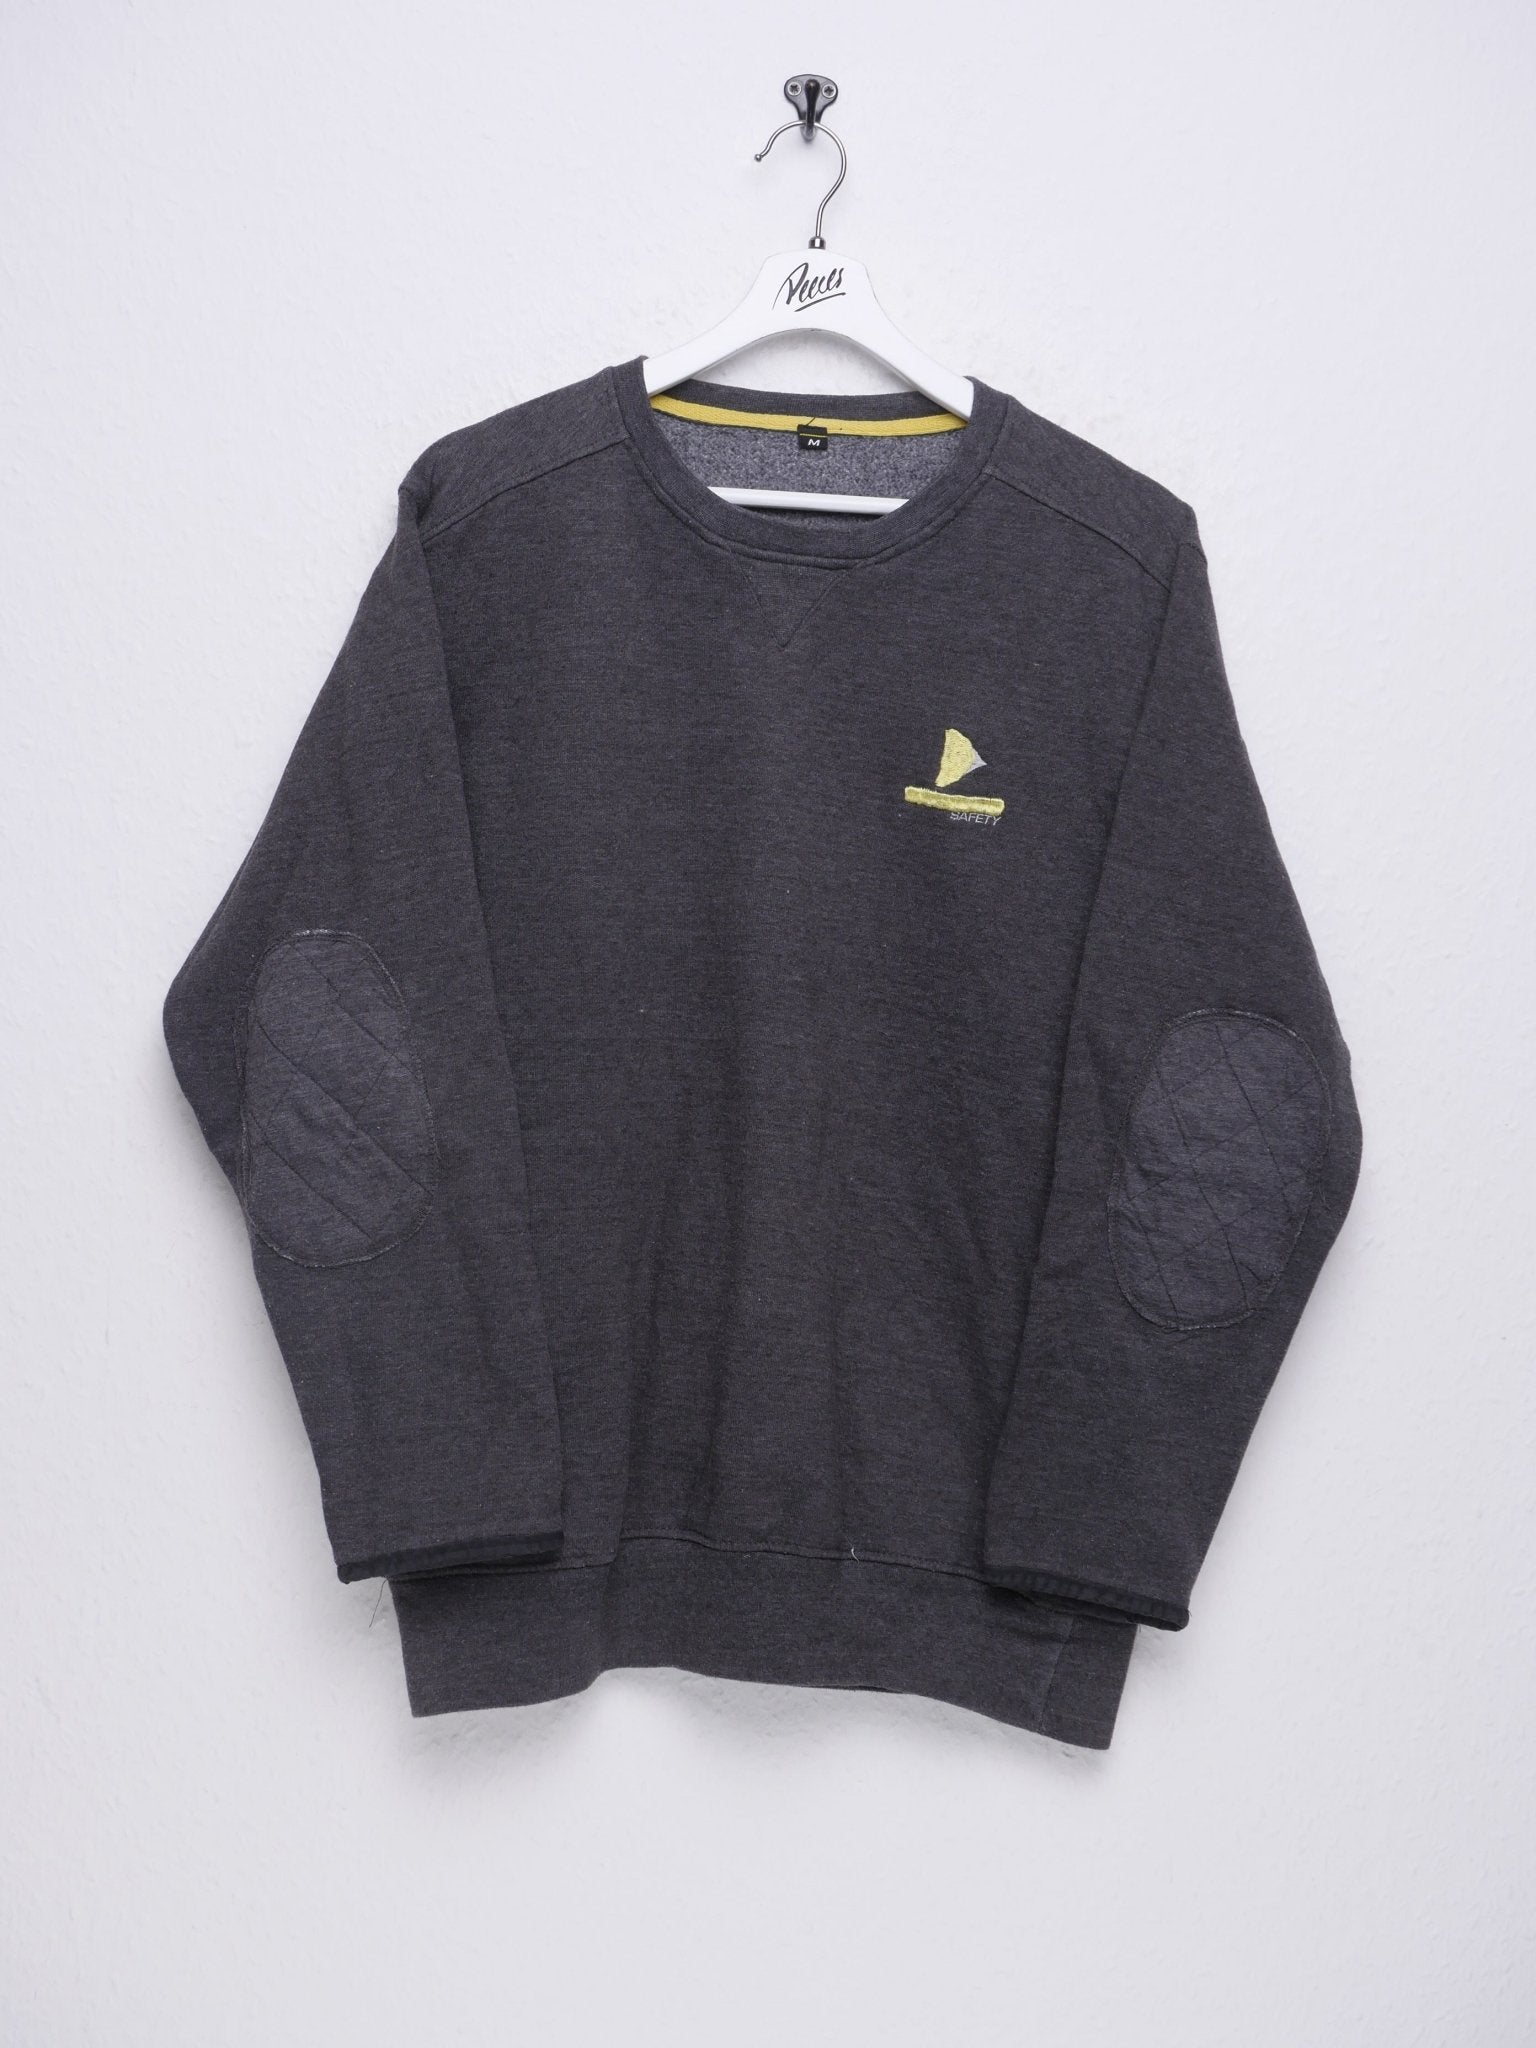 Safety embroidered Logo dark grey Sweater - Peeces